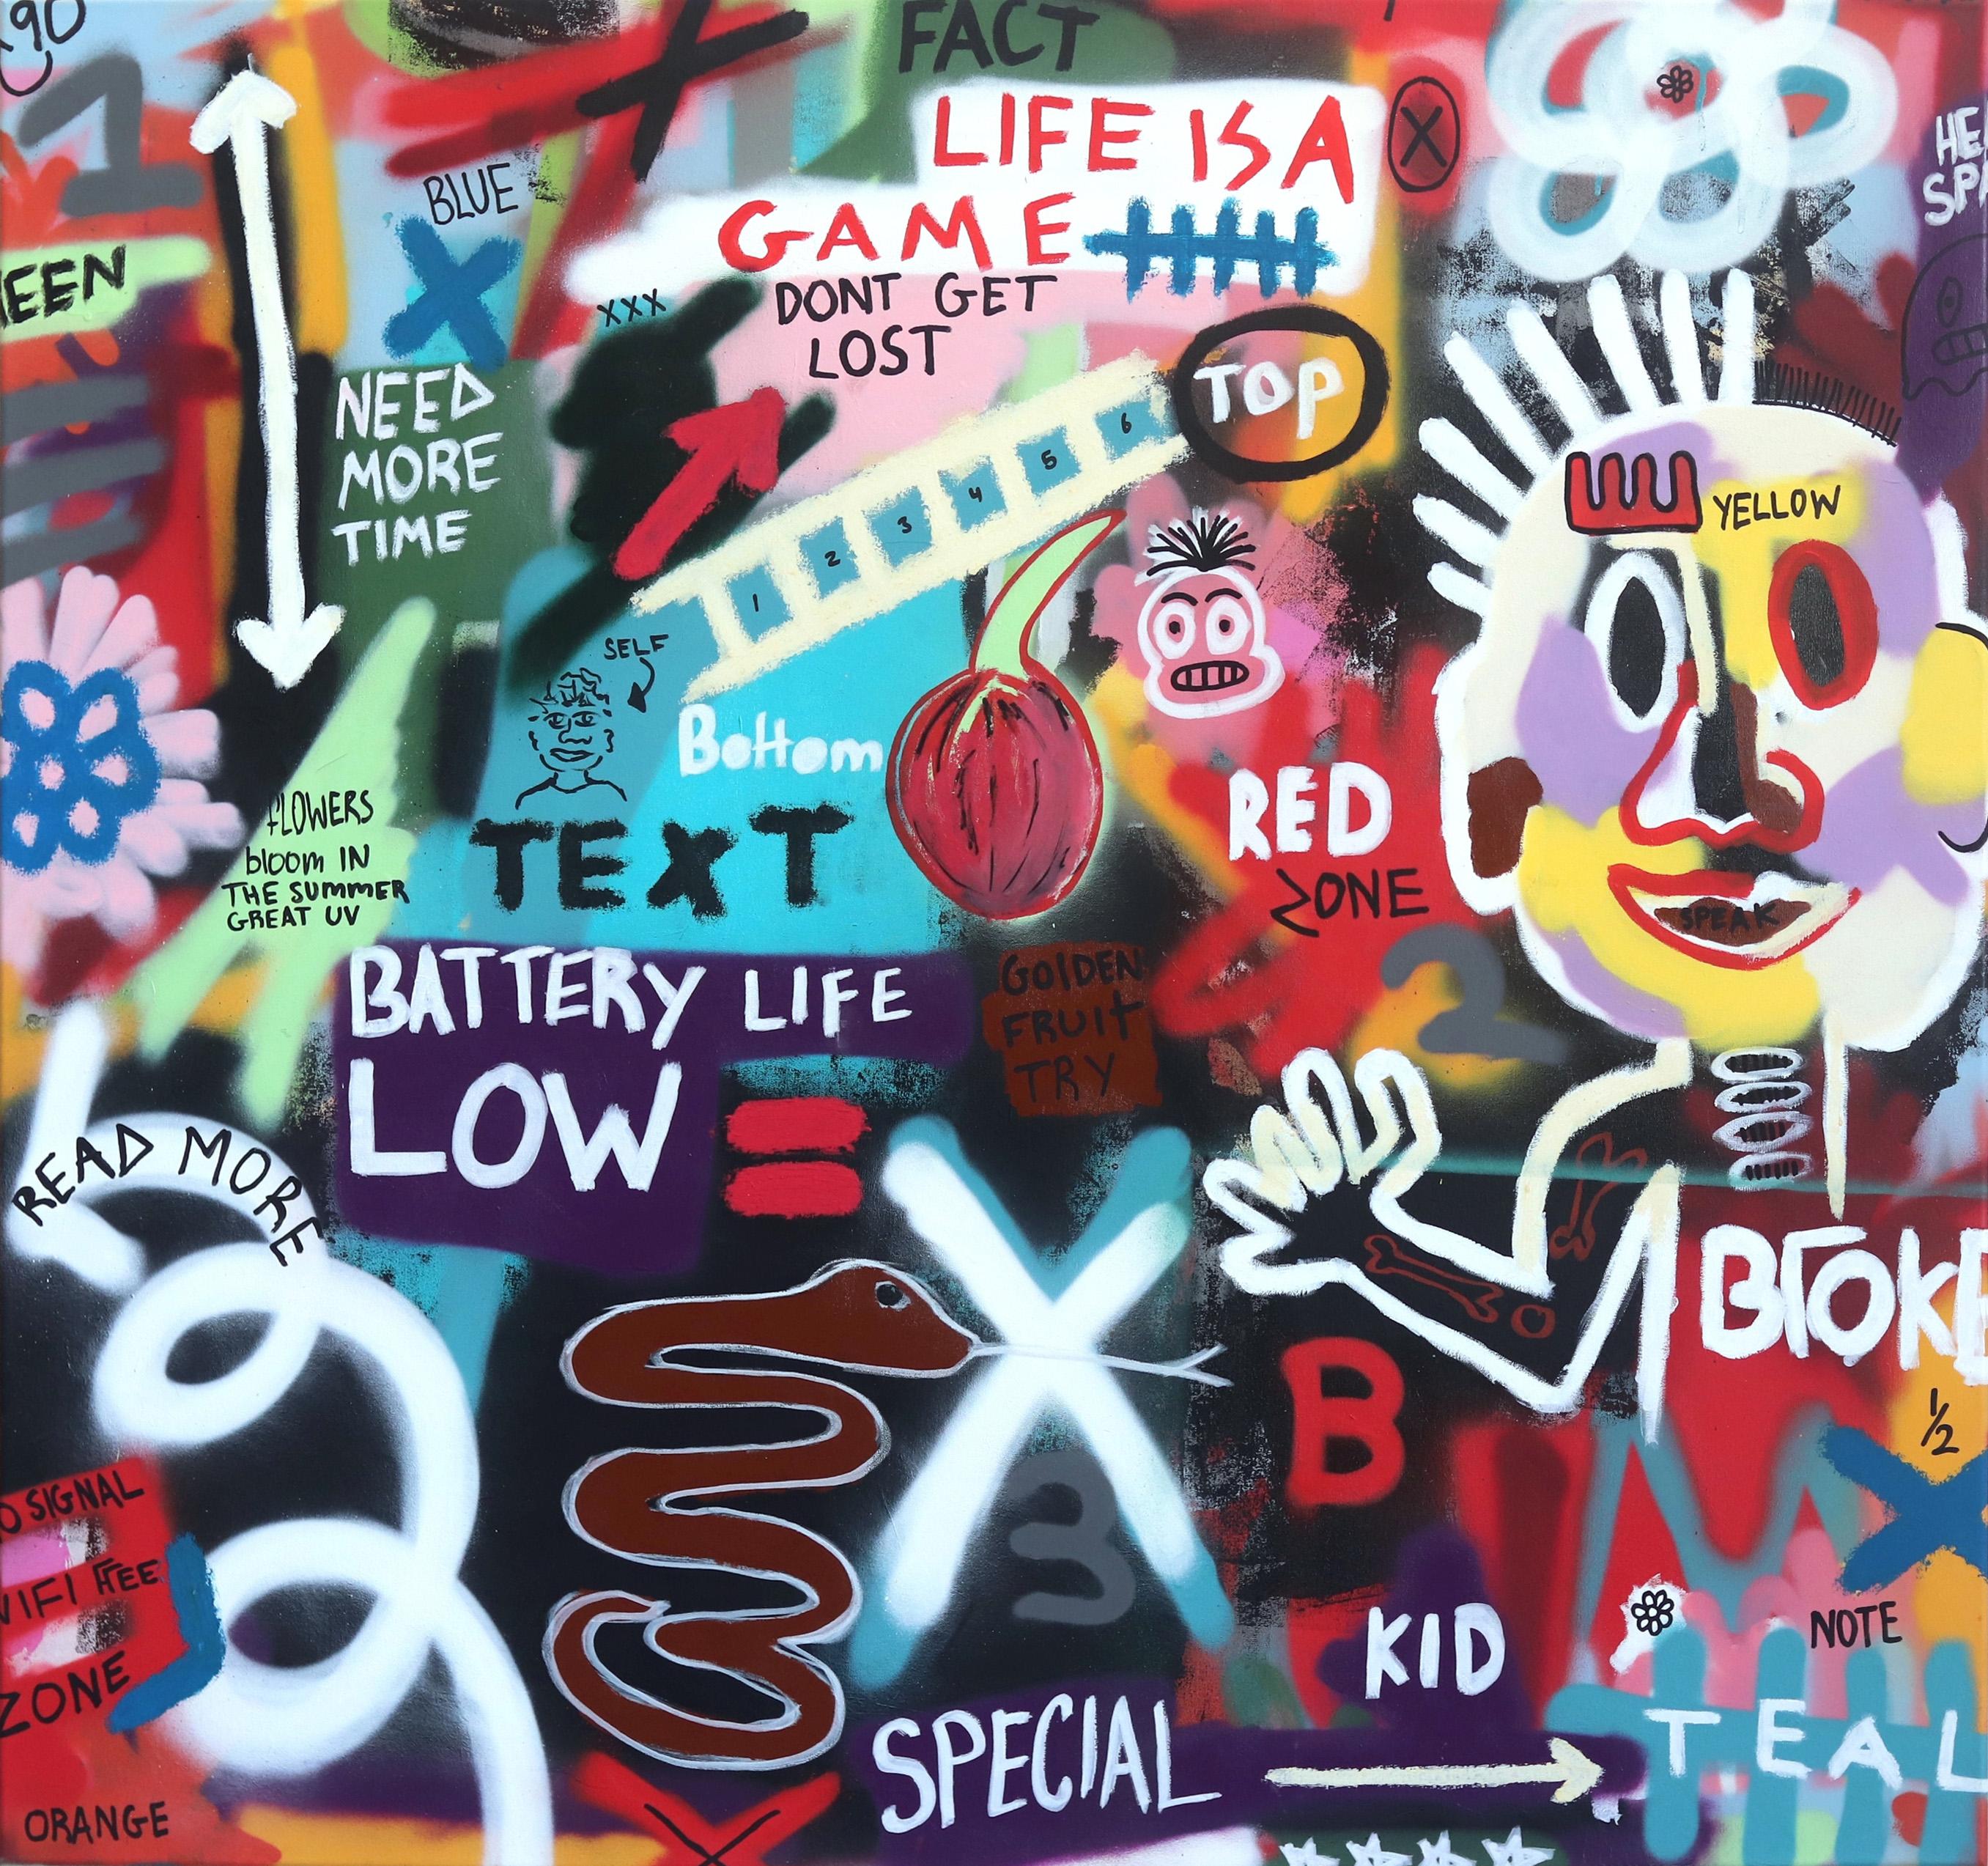 Life Is A Game - Large Colorful Contemporary Street Art Painting Figures Text - Mixed Media Art by Alex Reagan